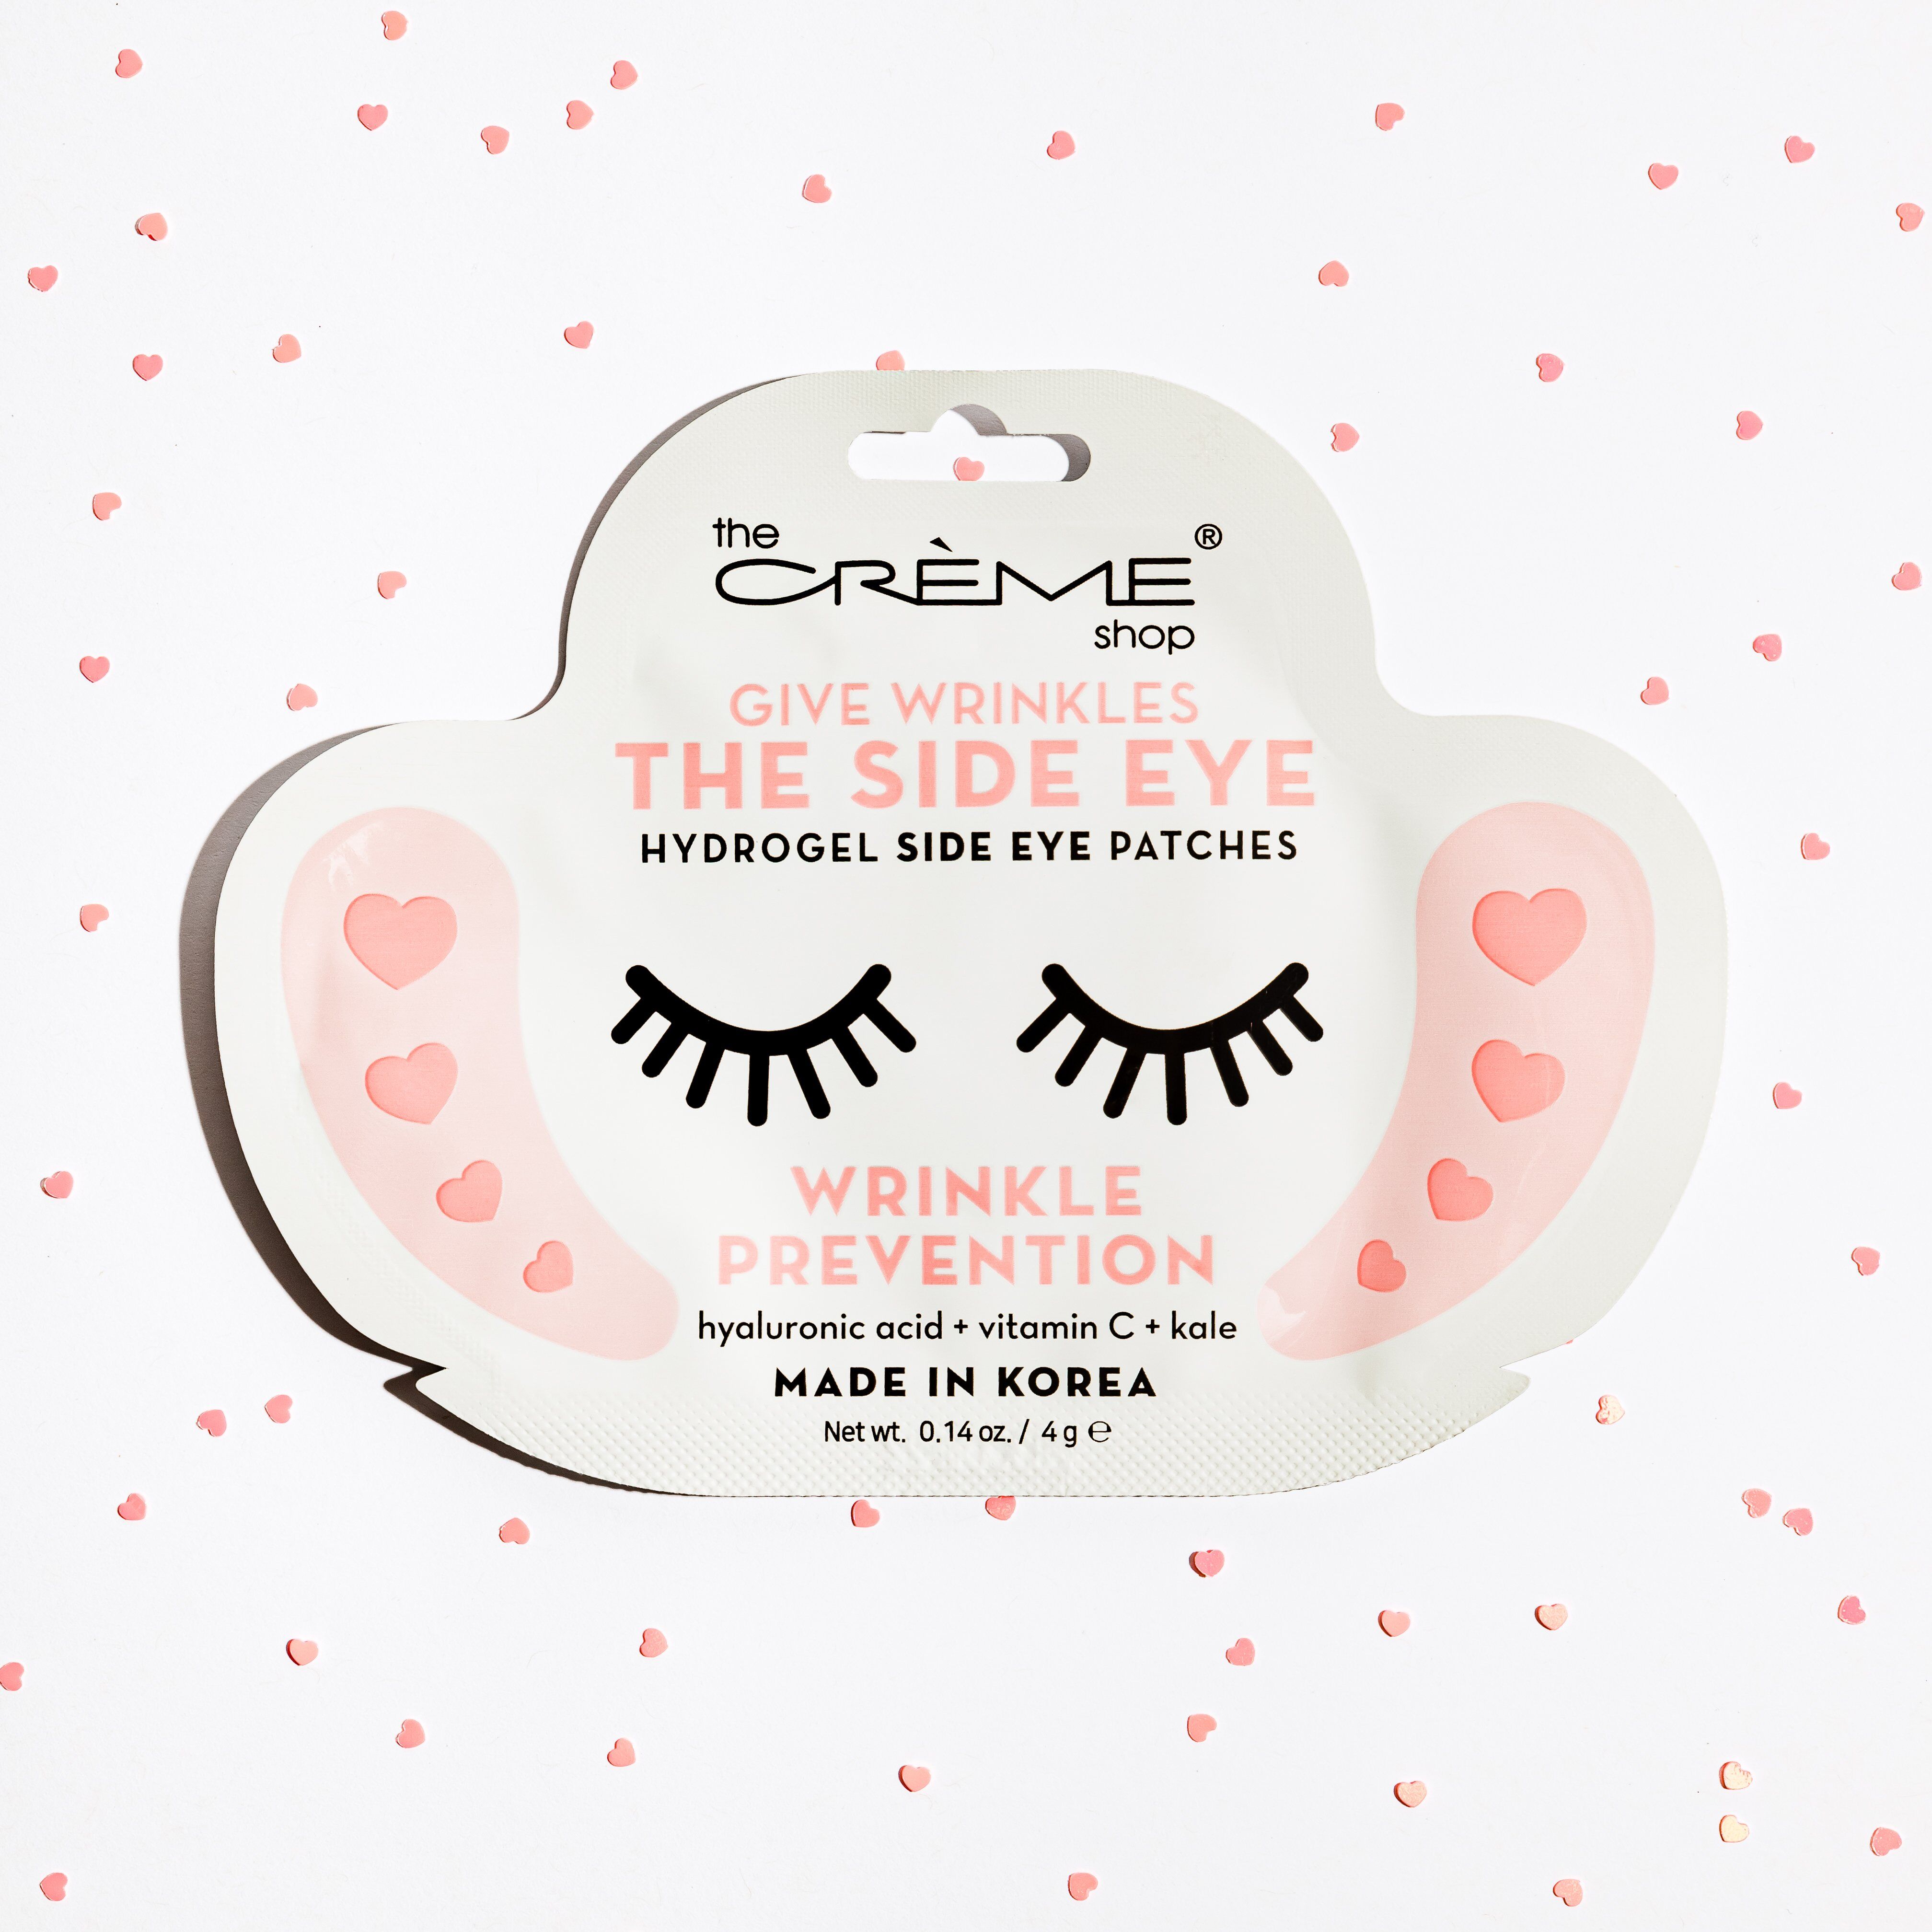 The Crème Shop - Give Wrinkles The Side Eye - Hydrogel Side Eye Patches, Wrinkle Prevention